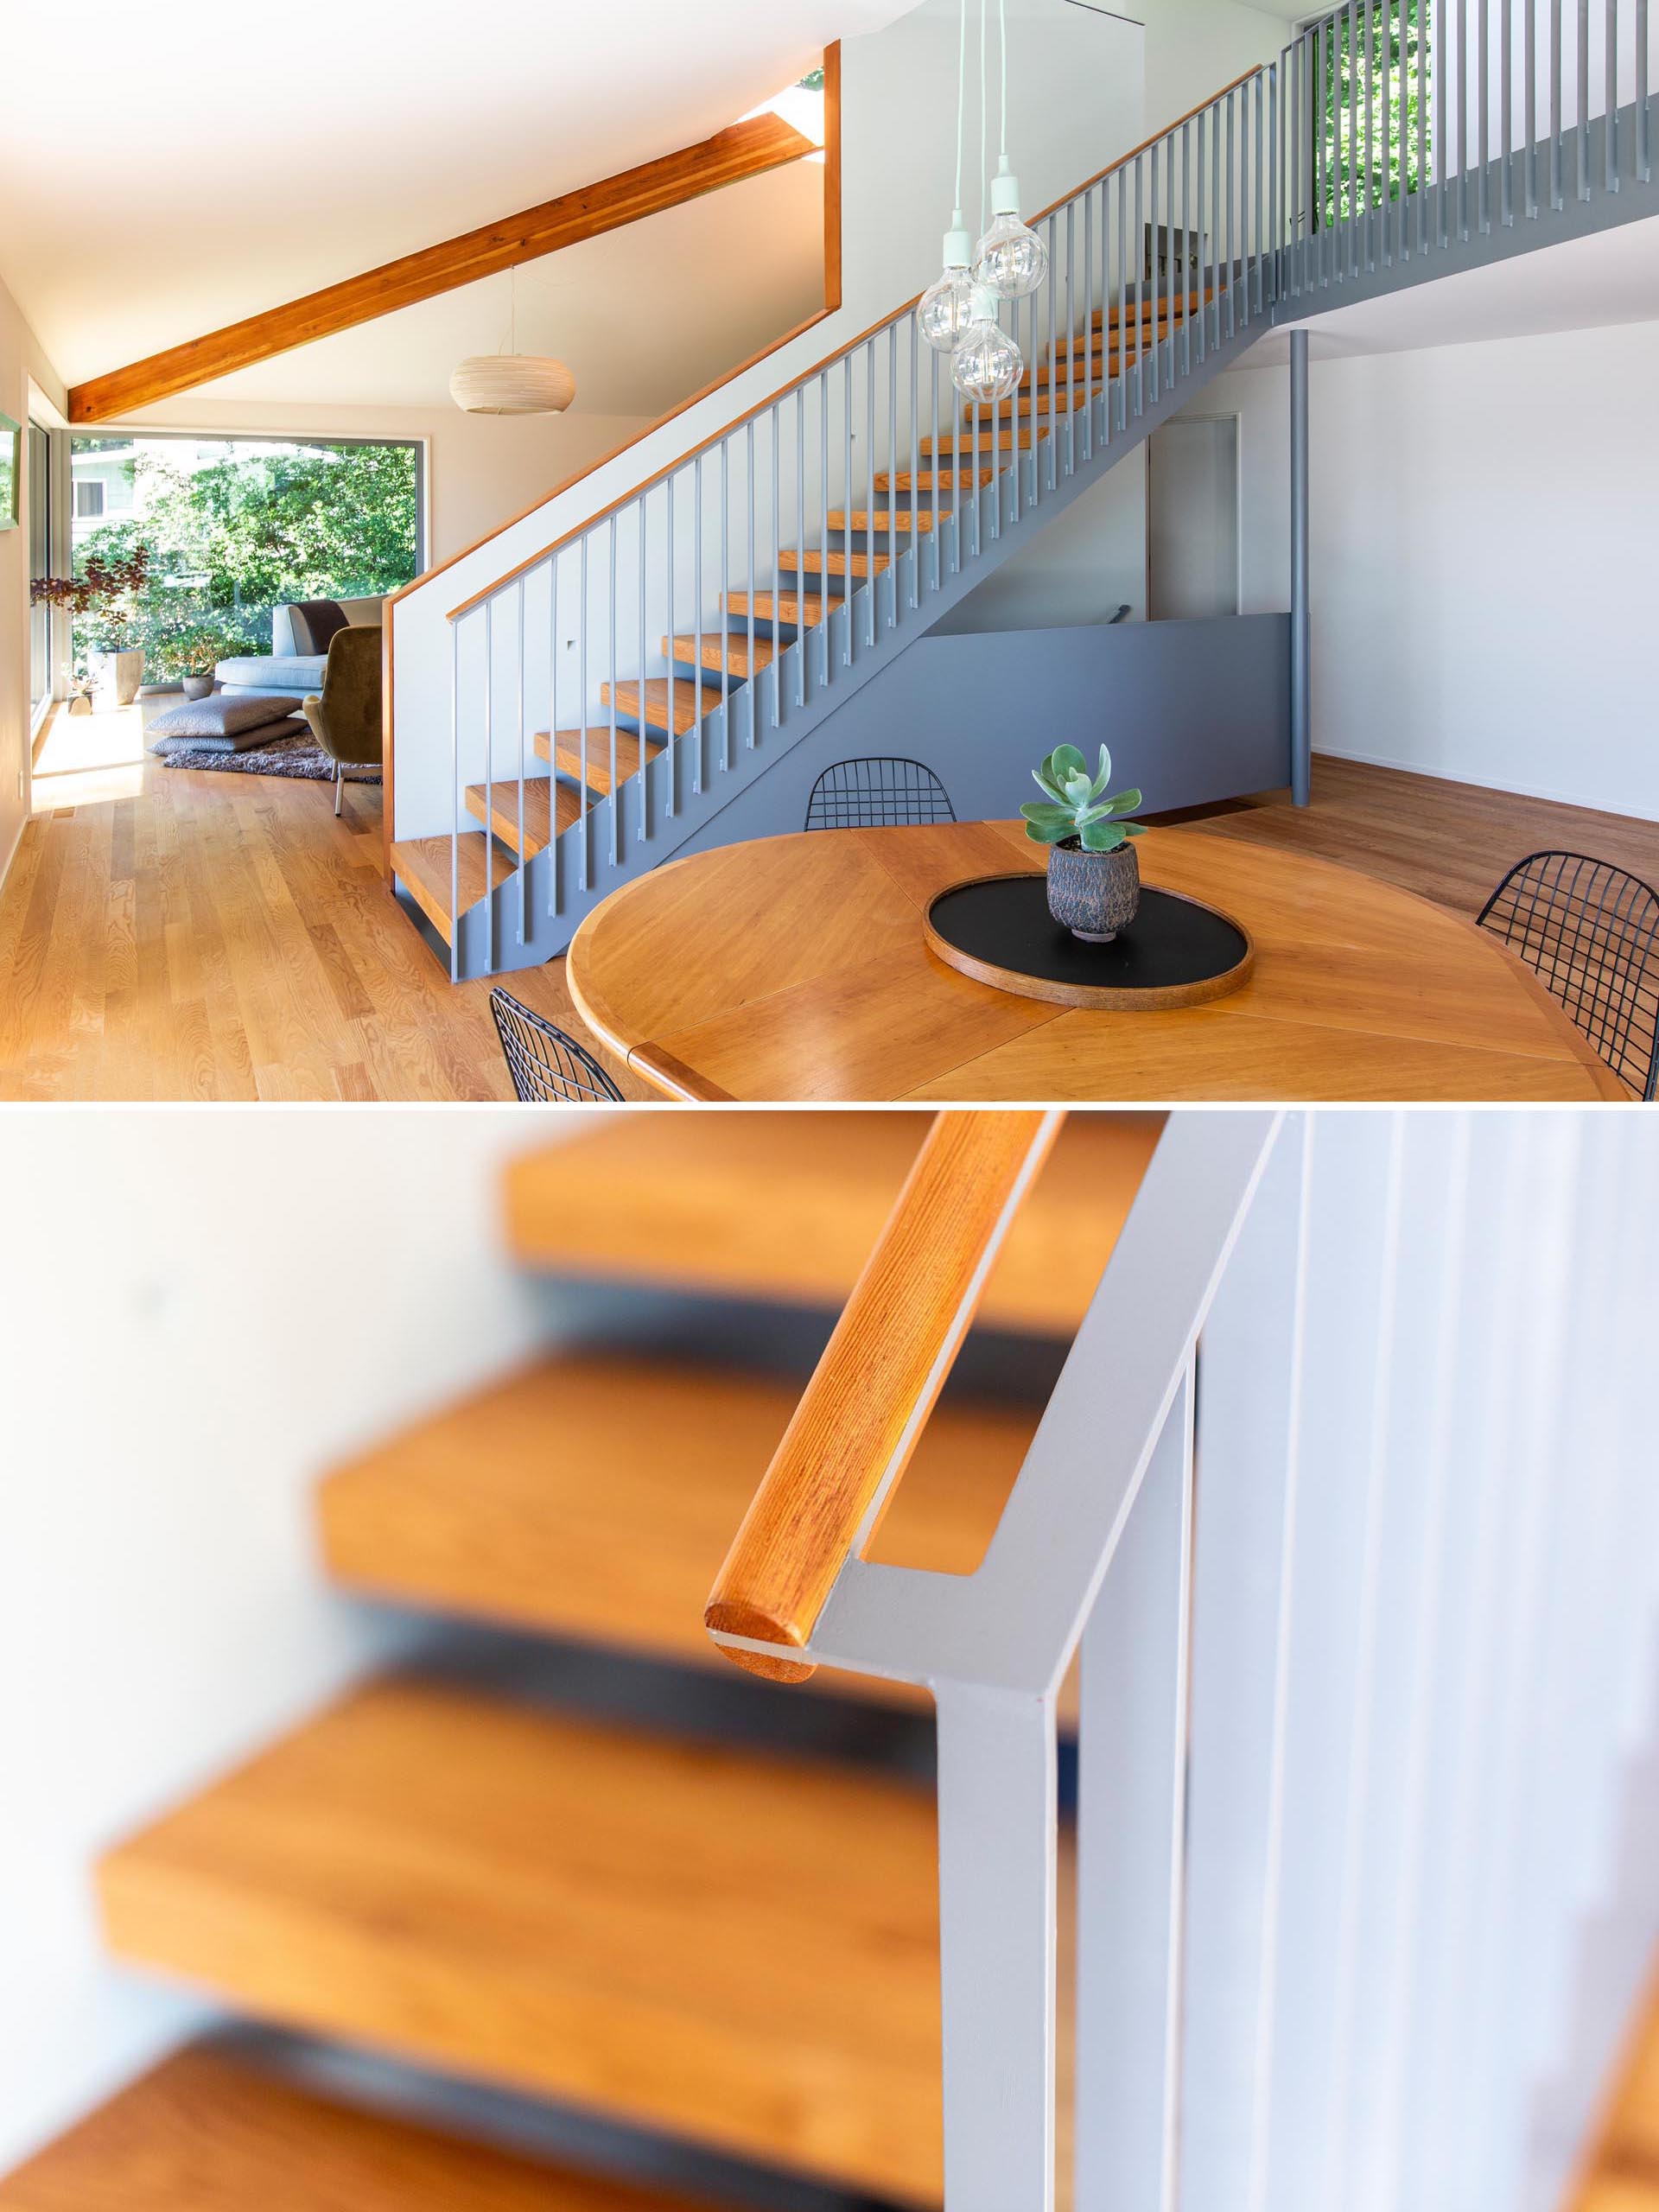 Matte gray and wood stairs connect the main level of this modern home with the upper floor.